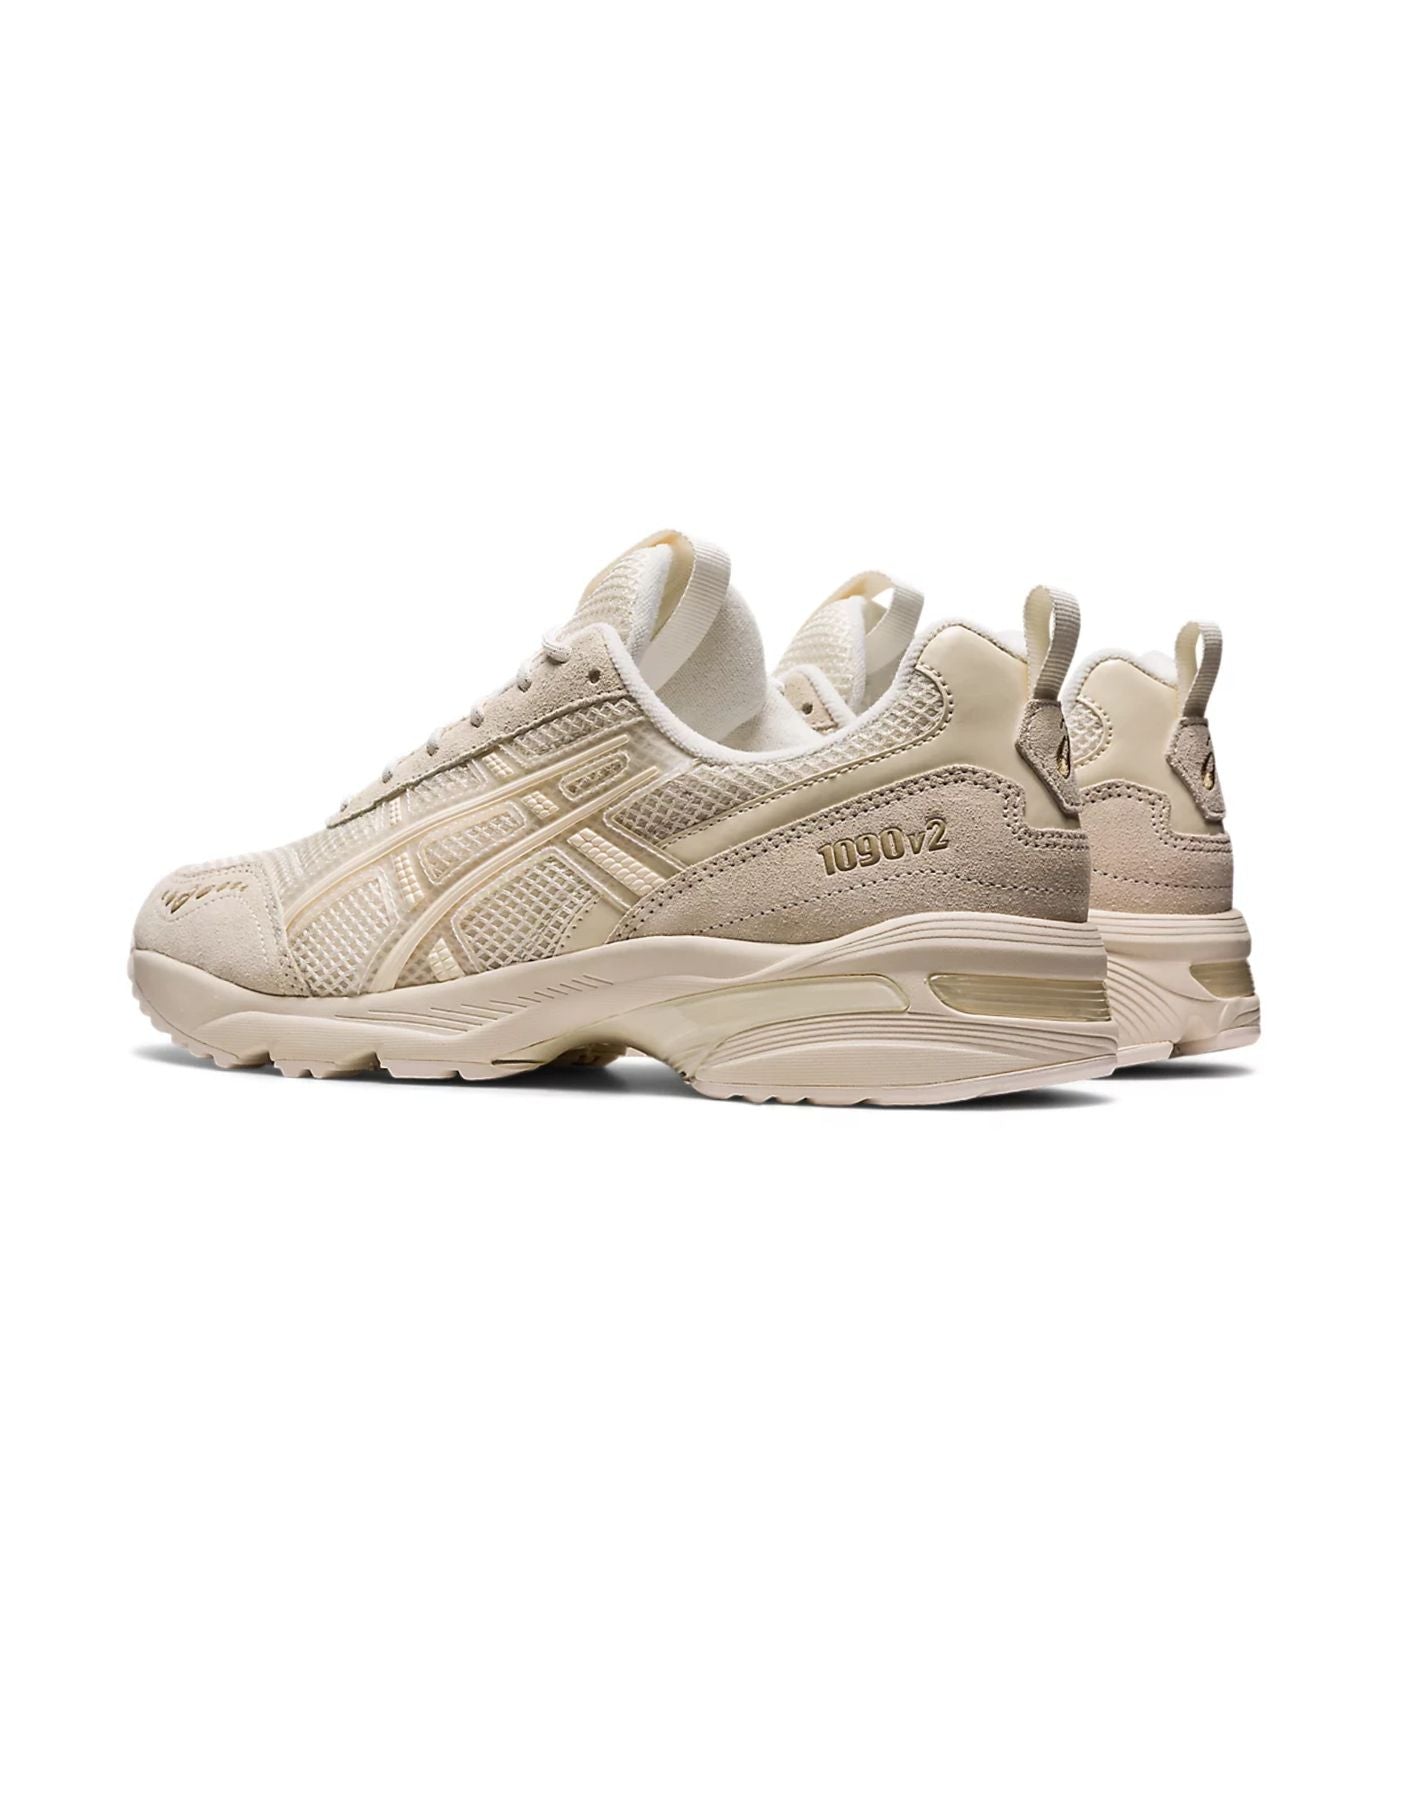 Shoes for woman GEL-1090v2 CREAM W ASICS